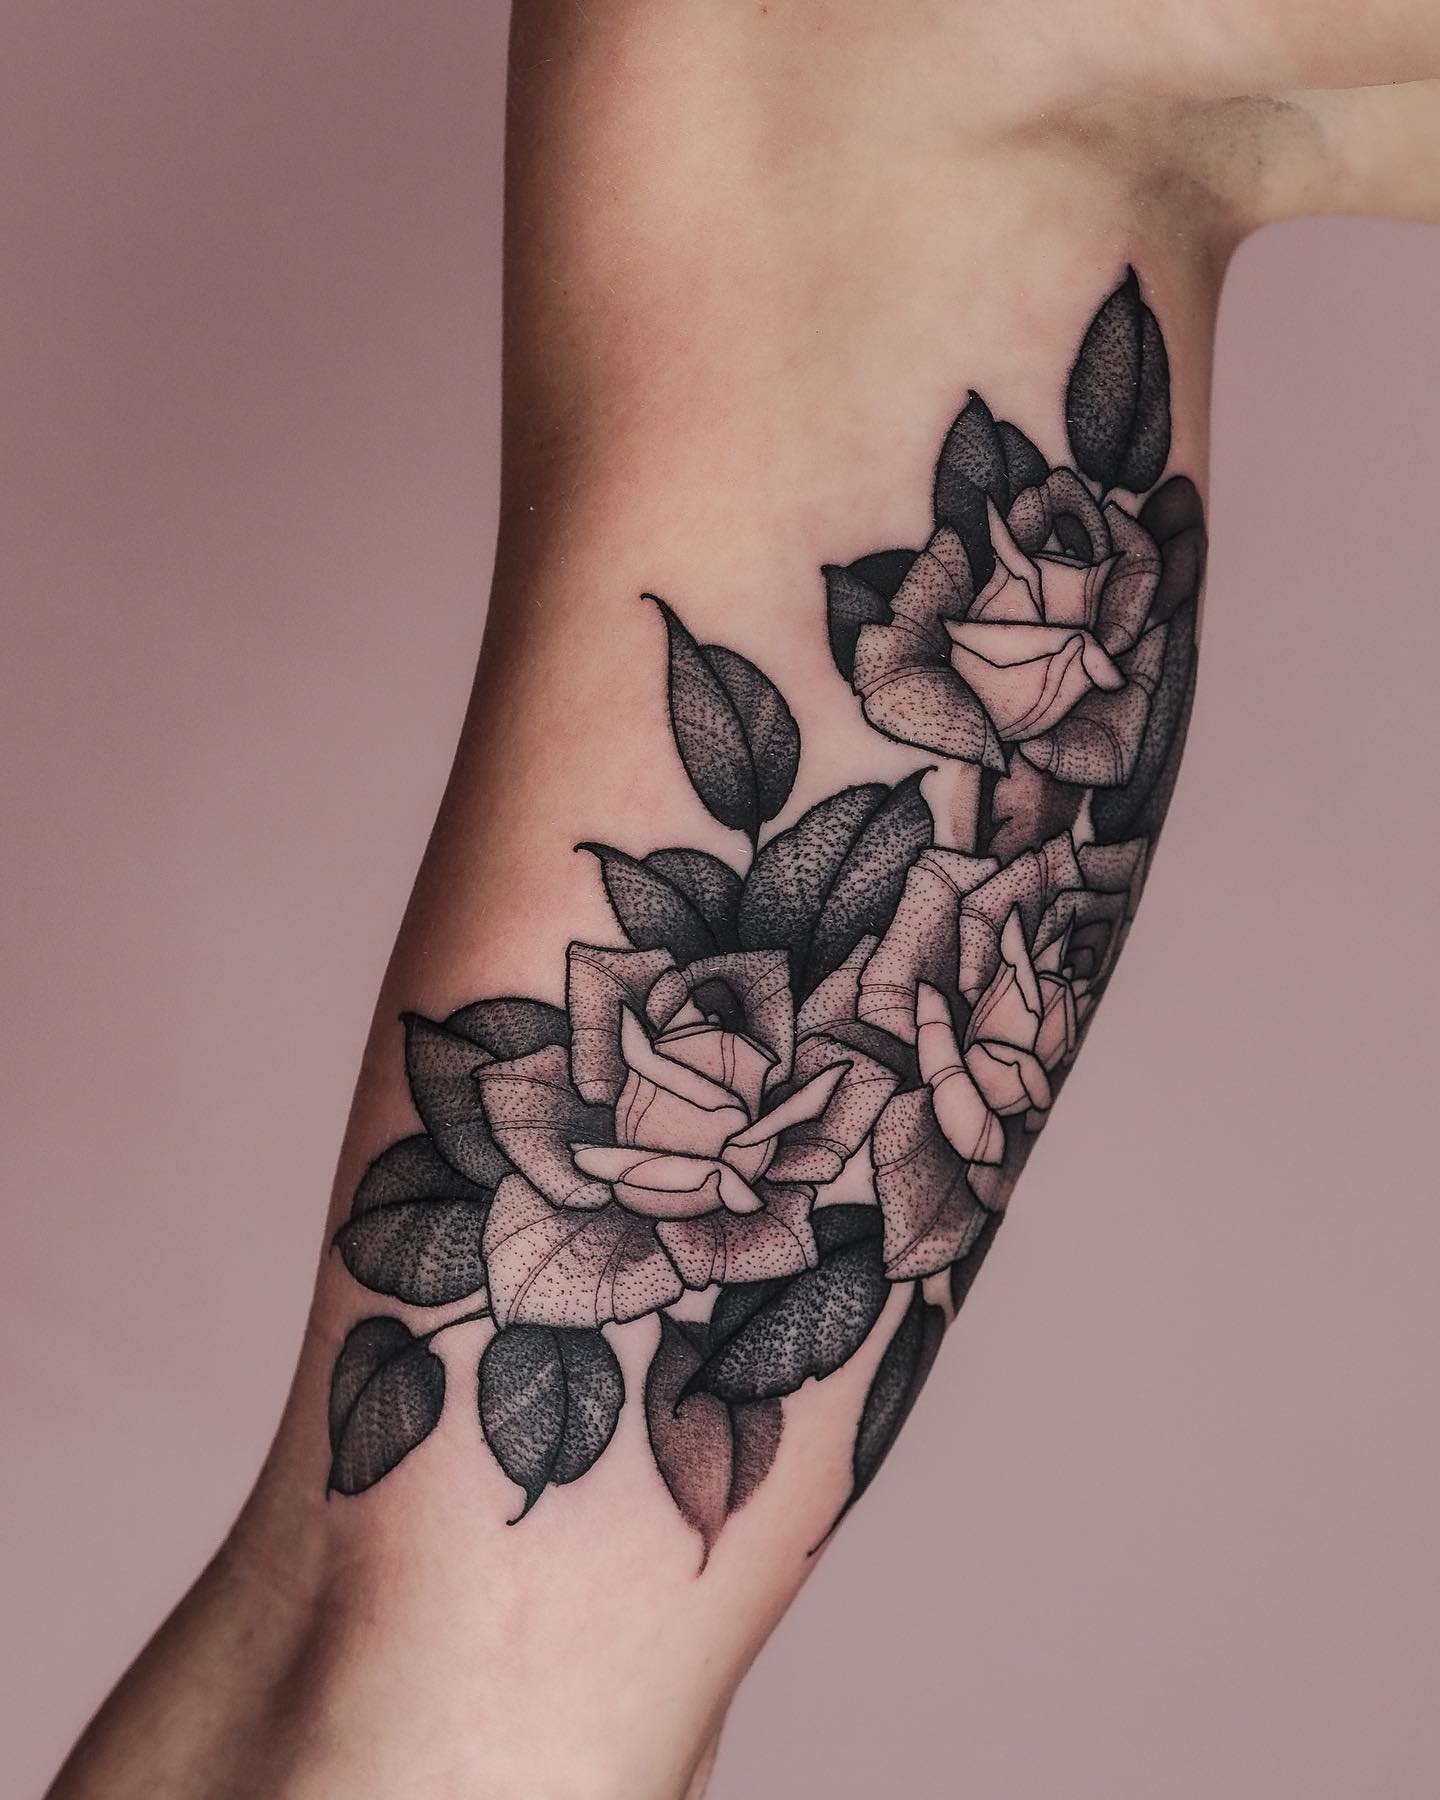 one from my wanna-do&rsquo;s 🌹 always grateful for those of you who get my designs tysm 🙏&hearts;️
.
.
.
.
.
.
.
#tattoo #tattoos #tattooartist #tattooshop  #tattooinspo #wpg #wpgtattoos #winnipeg #winnipegtattoos #winnipegtattooartist #winnipegtat